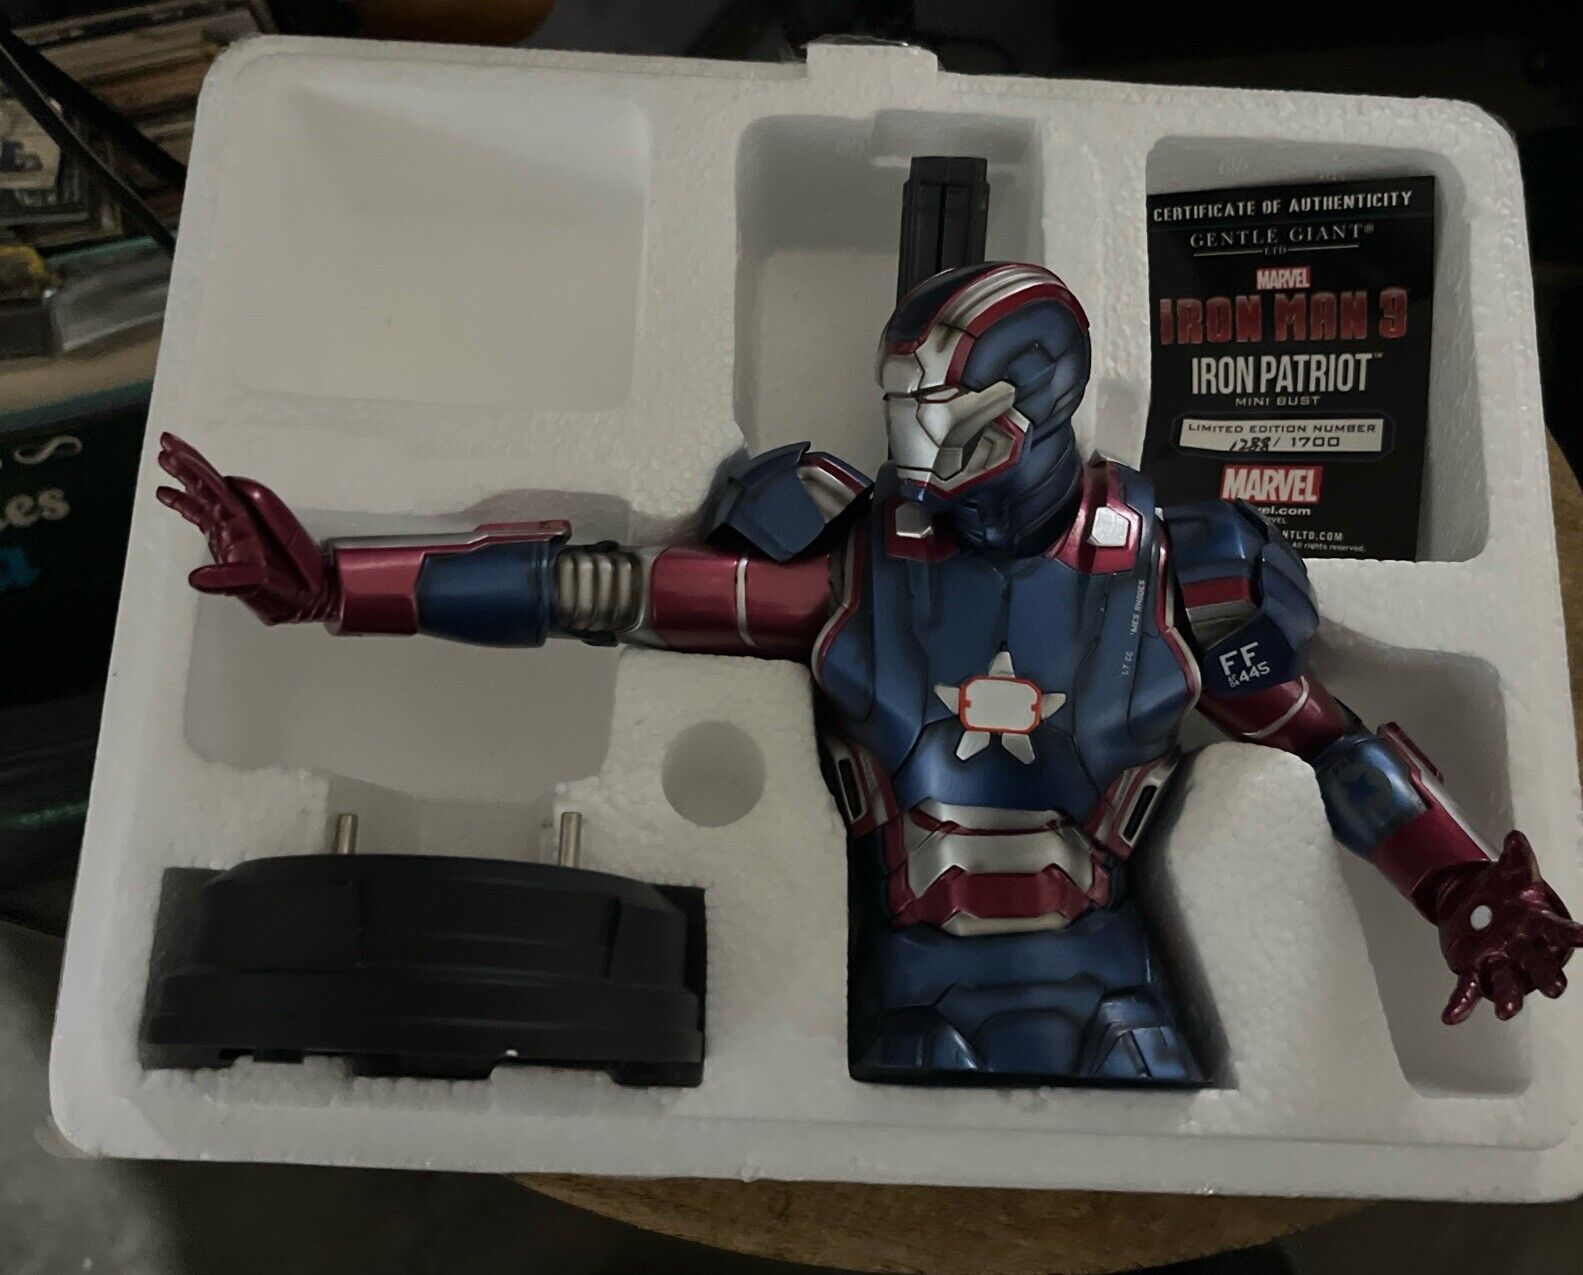 IRON PATRIOT Limited Edition Mini Bust RETIRED Gentle Giant Limited 1700 IOB VG